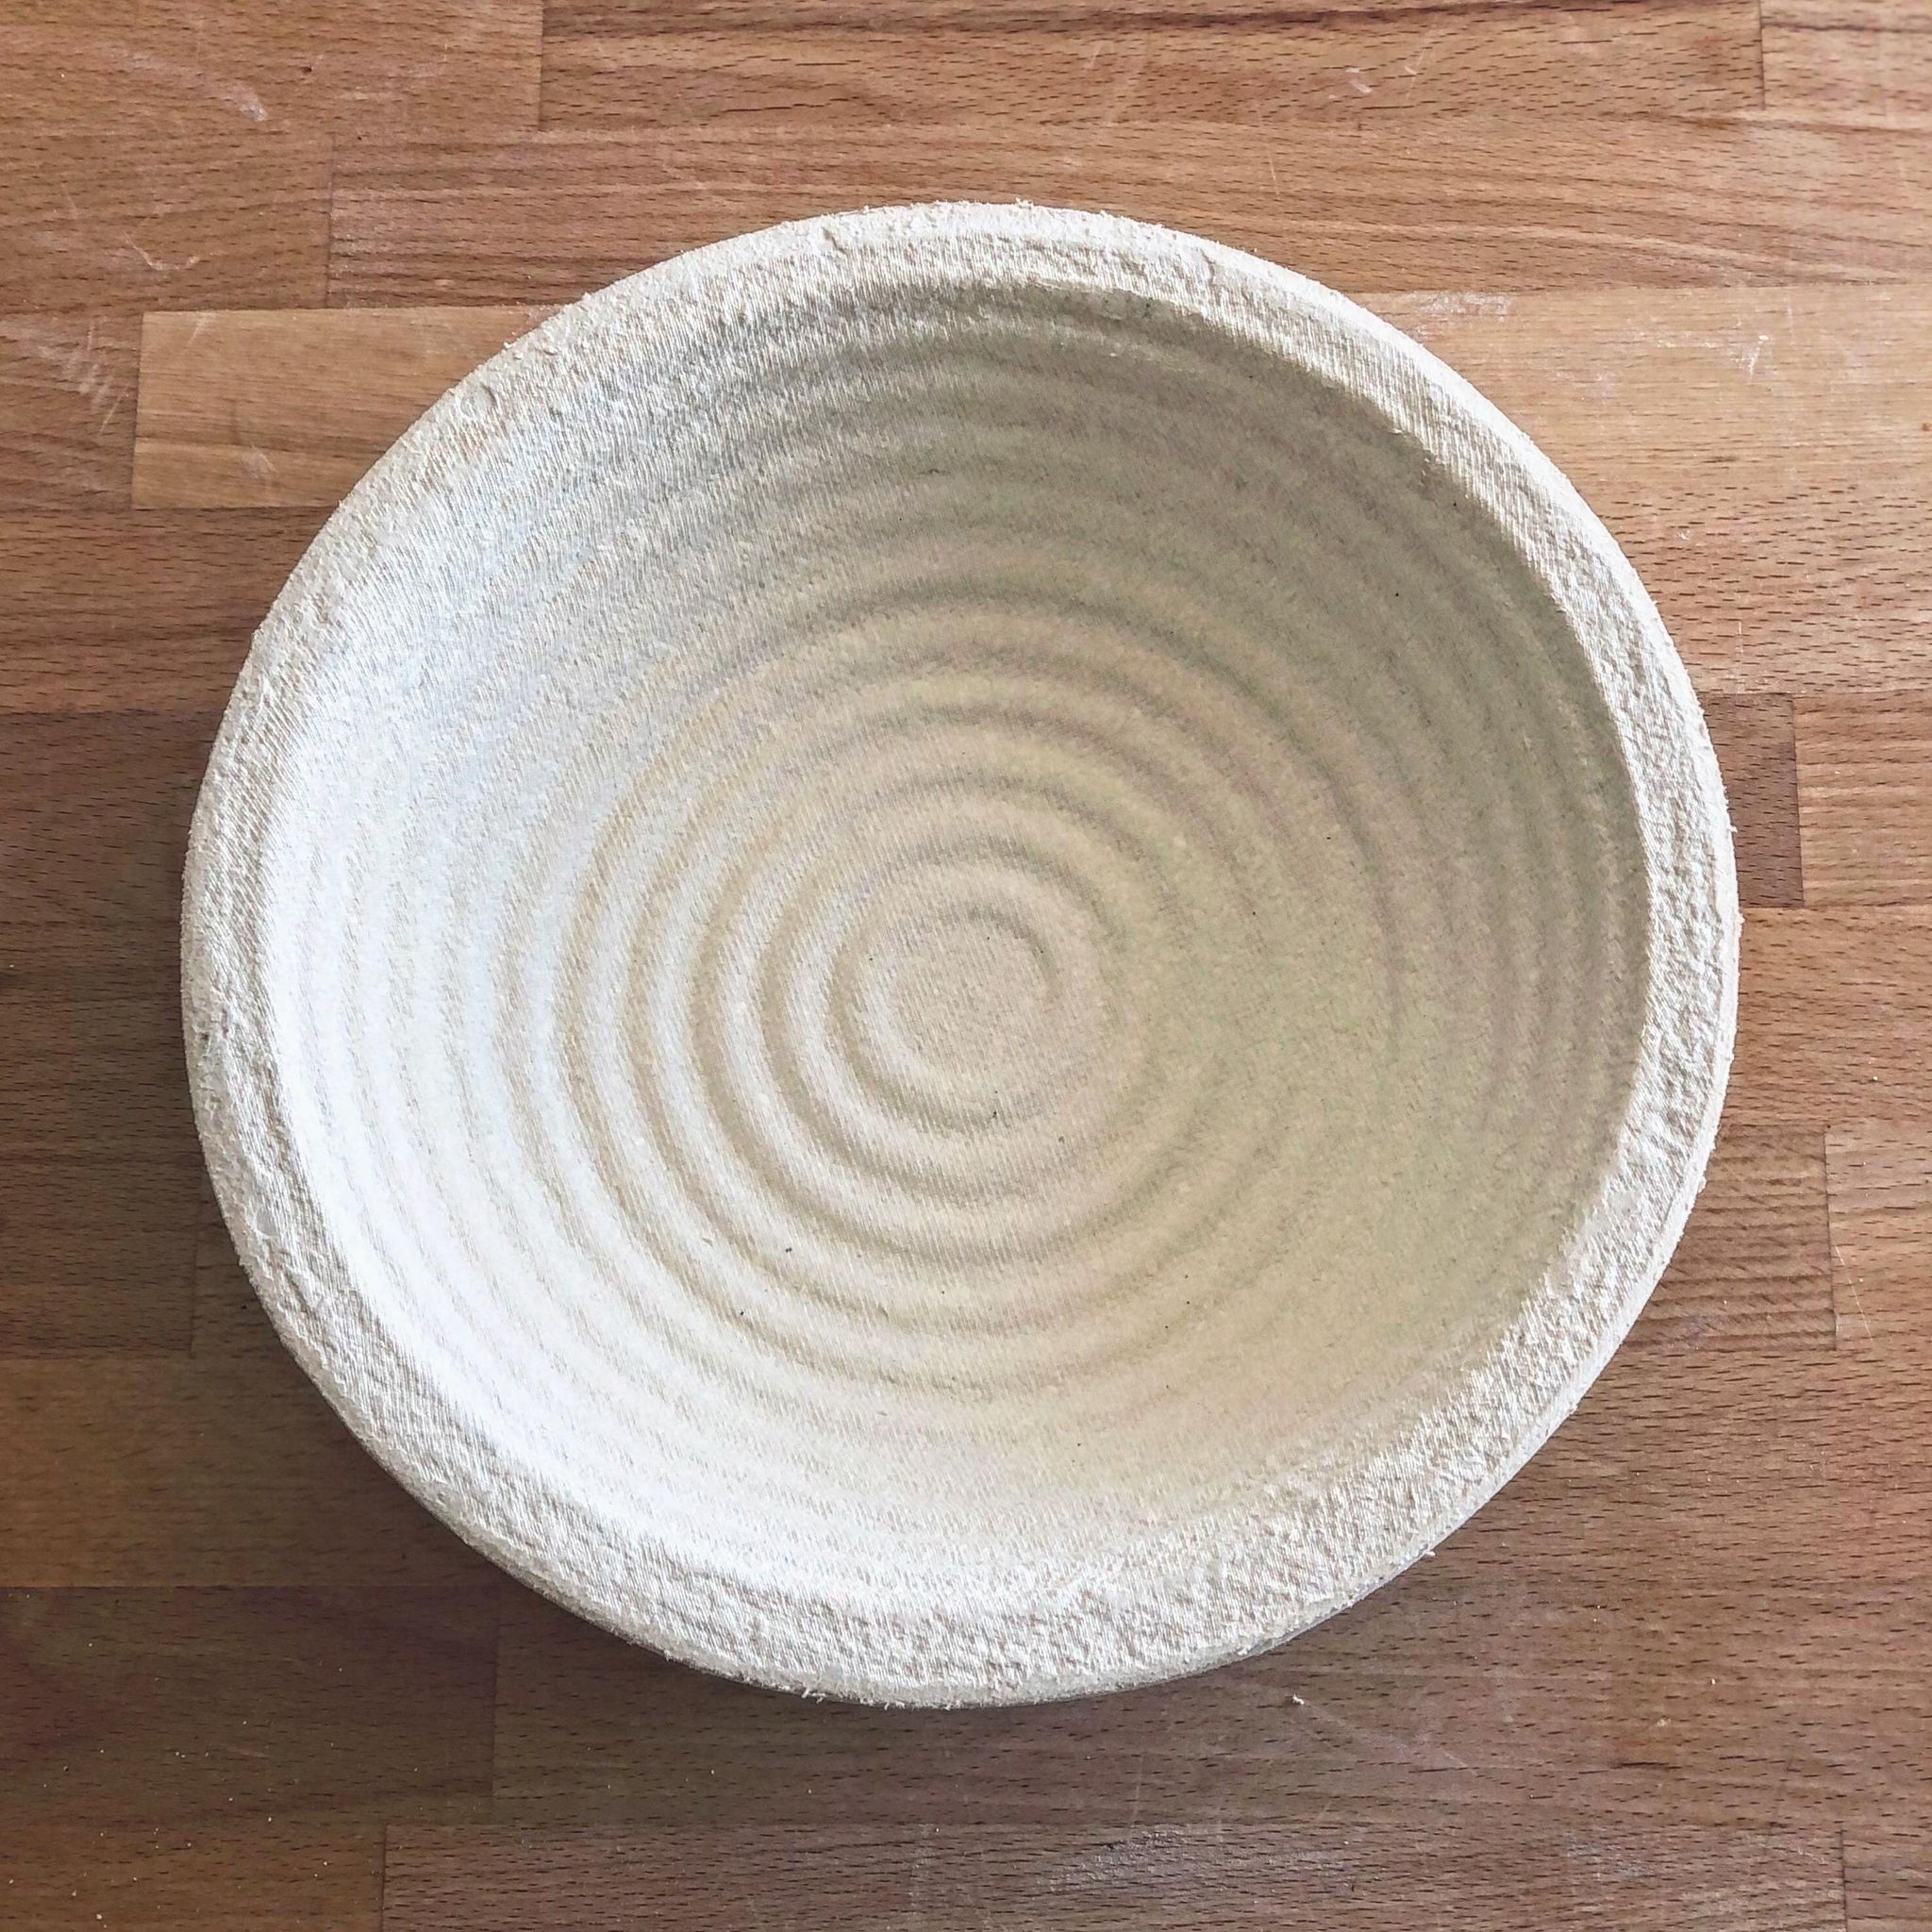 Proofing Basket (Round Grooved)